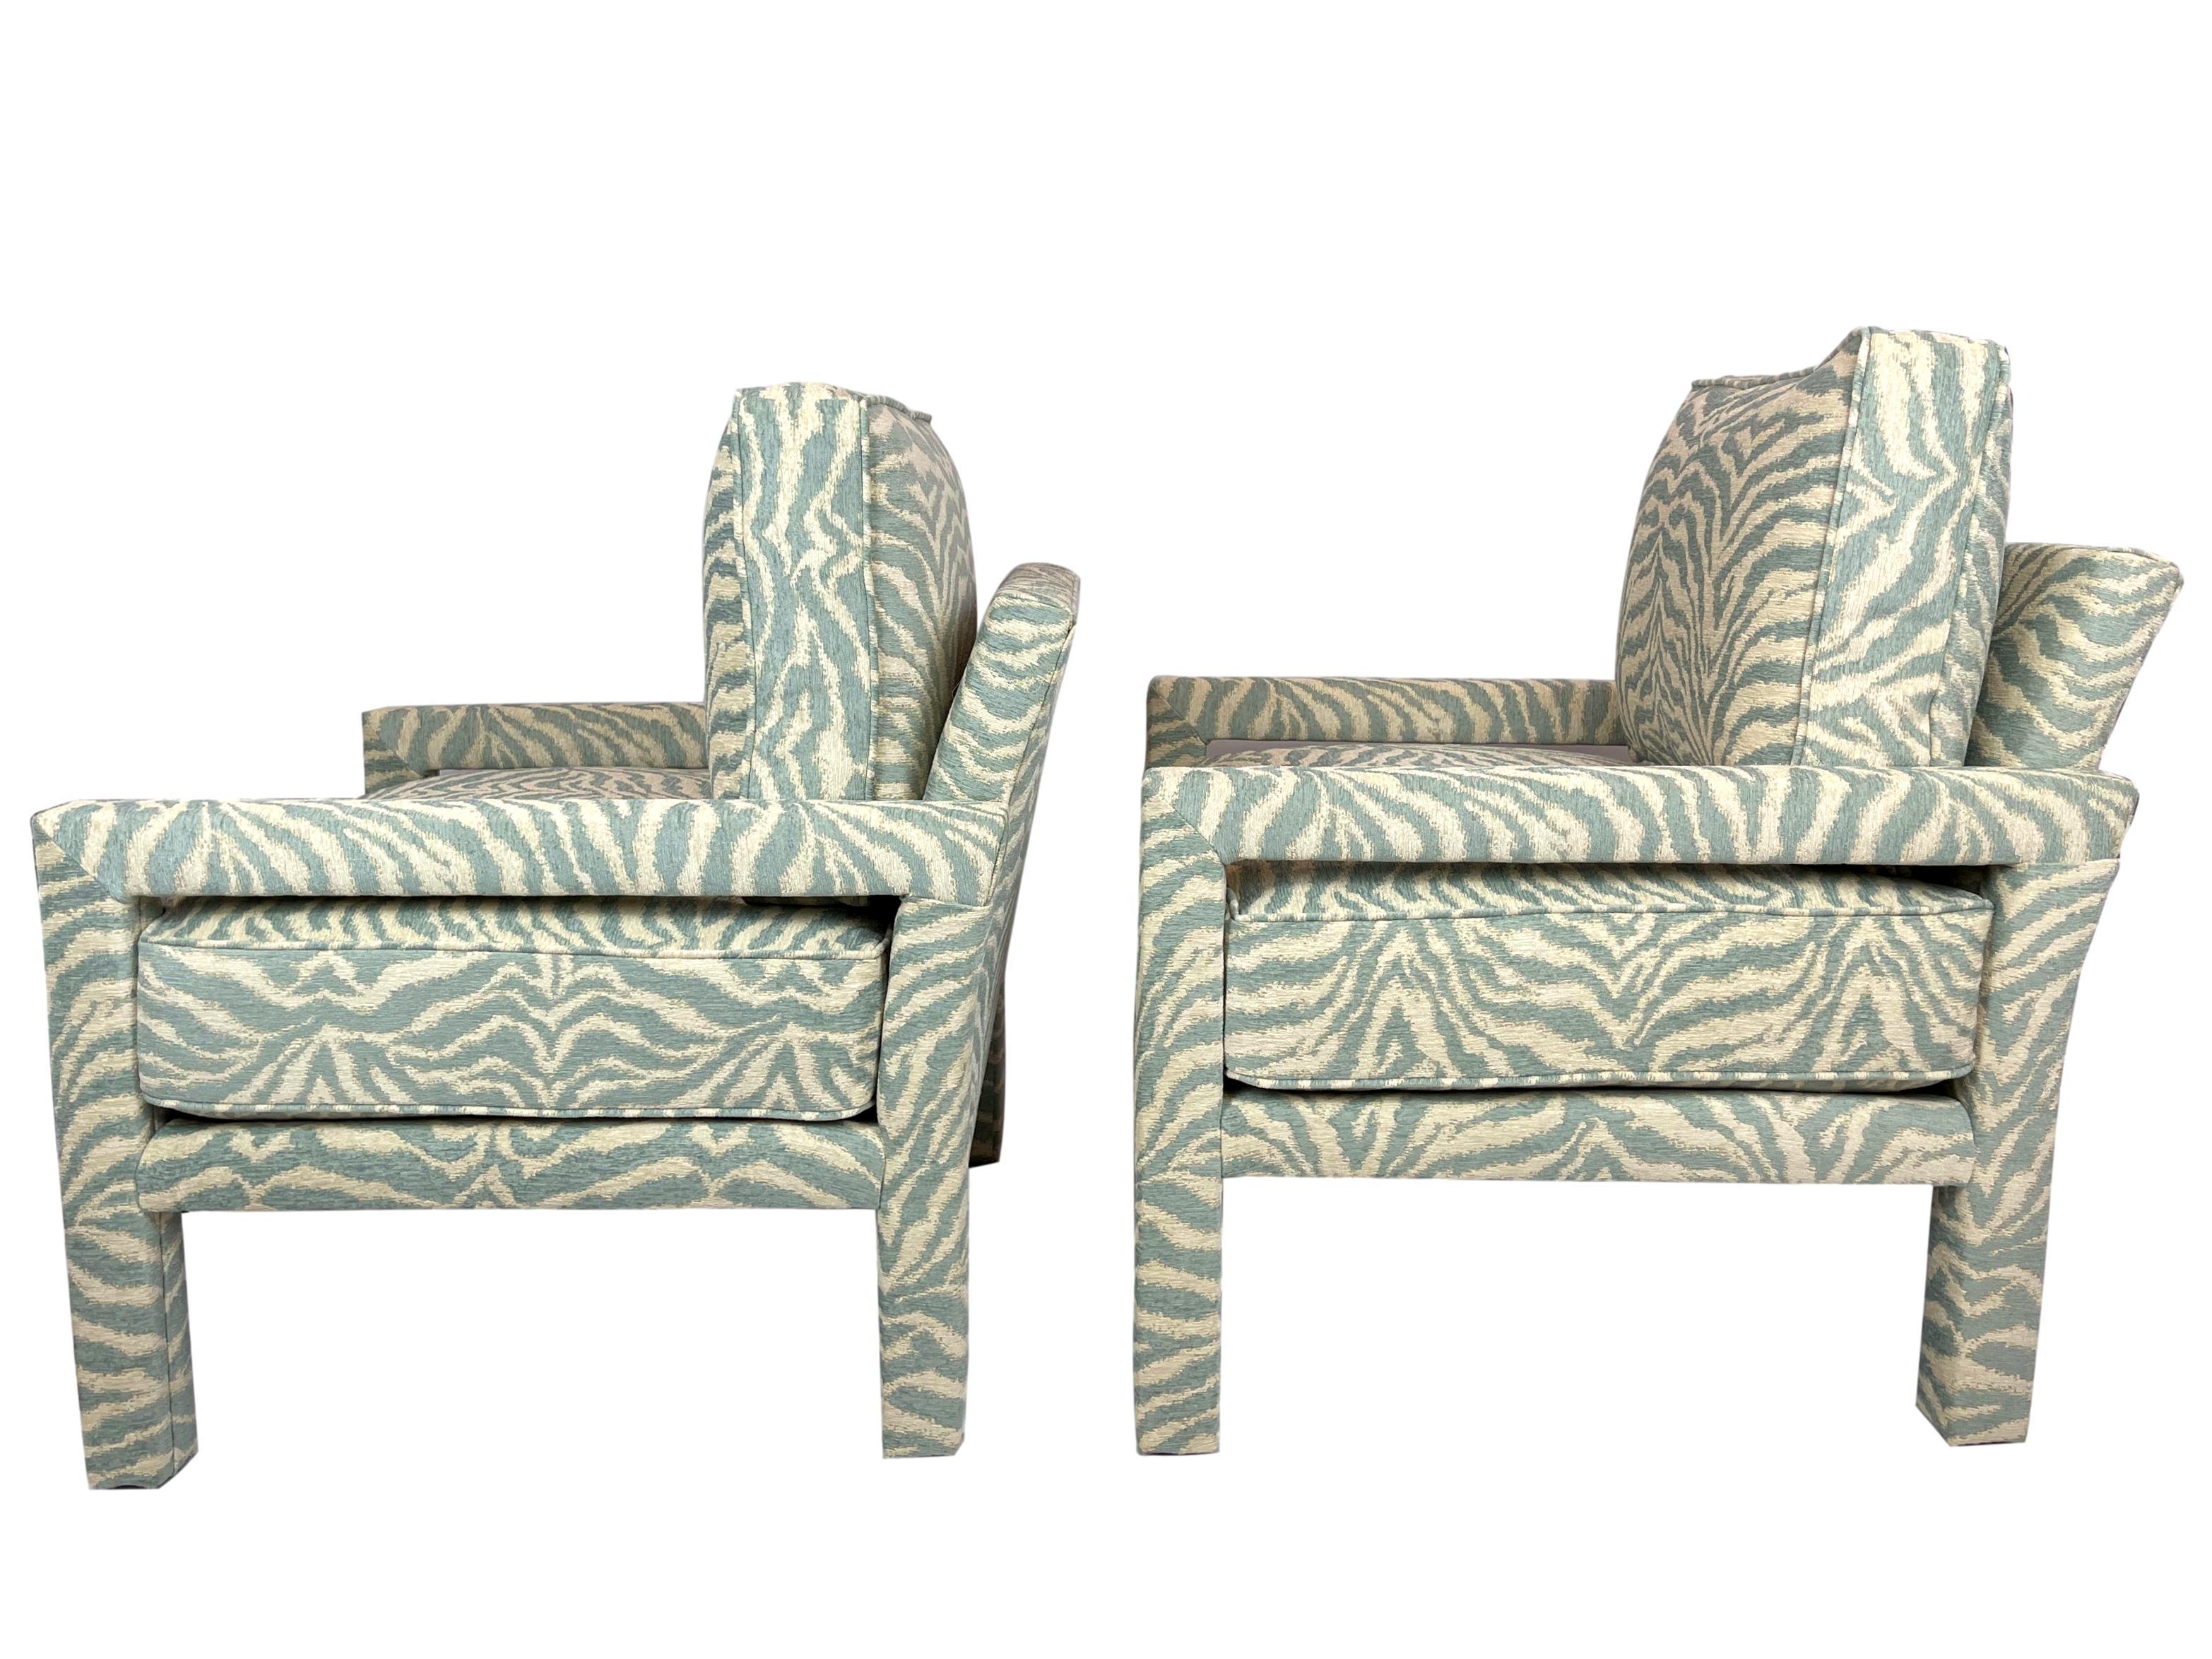 Pair of new Milo Baughman style parsons chairs upholstered in high-end designer zebra fabric.
Our chairs are handcrafted and upholstered from new materials and new fabric by the best craftsmen and artisans in Morganton, North Carolina, the high-end